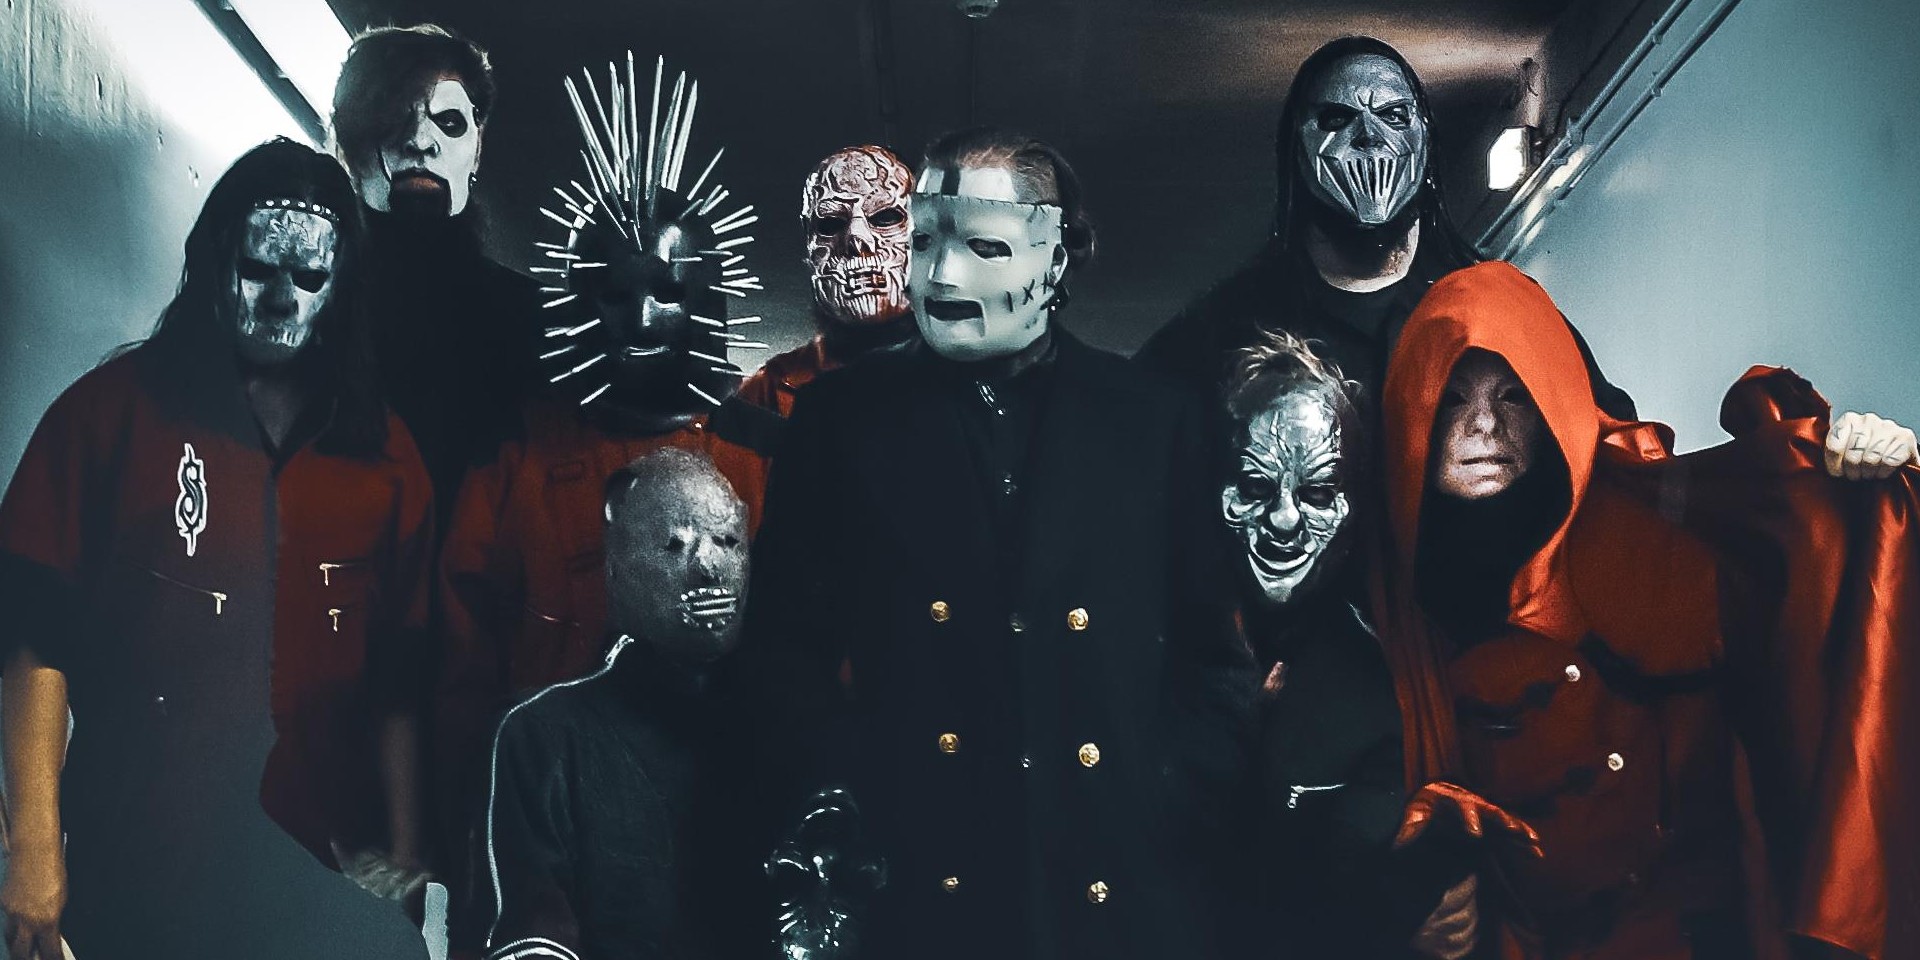 Slipknot to livestream Knotfest LA globally this November, here's how you can get tickets